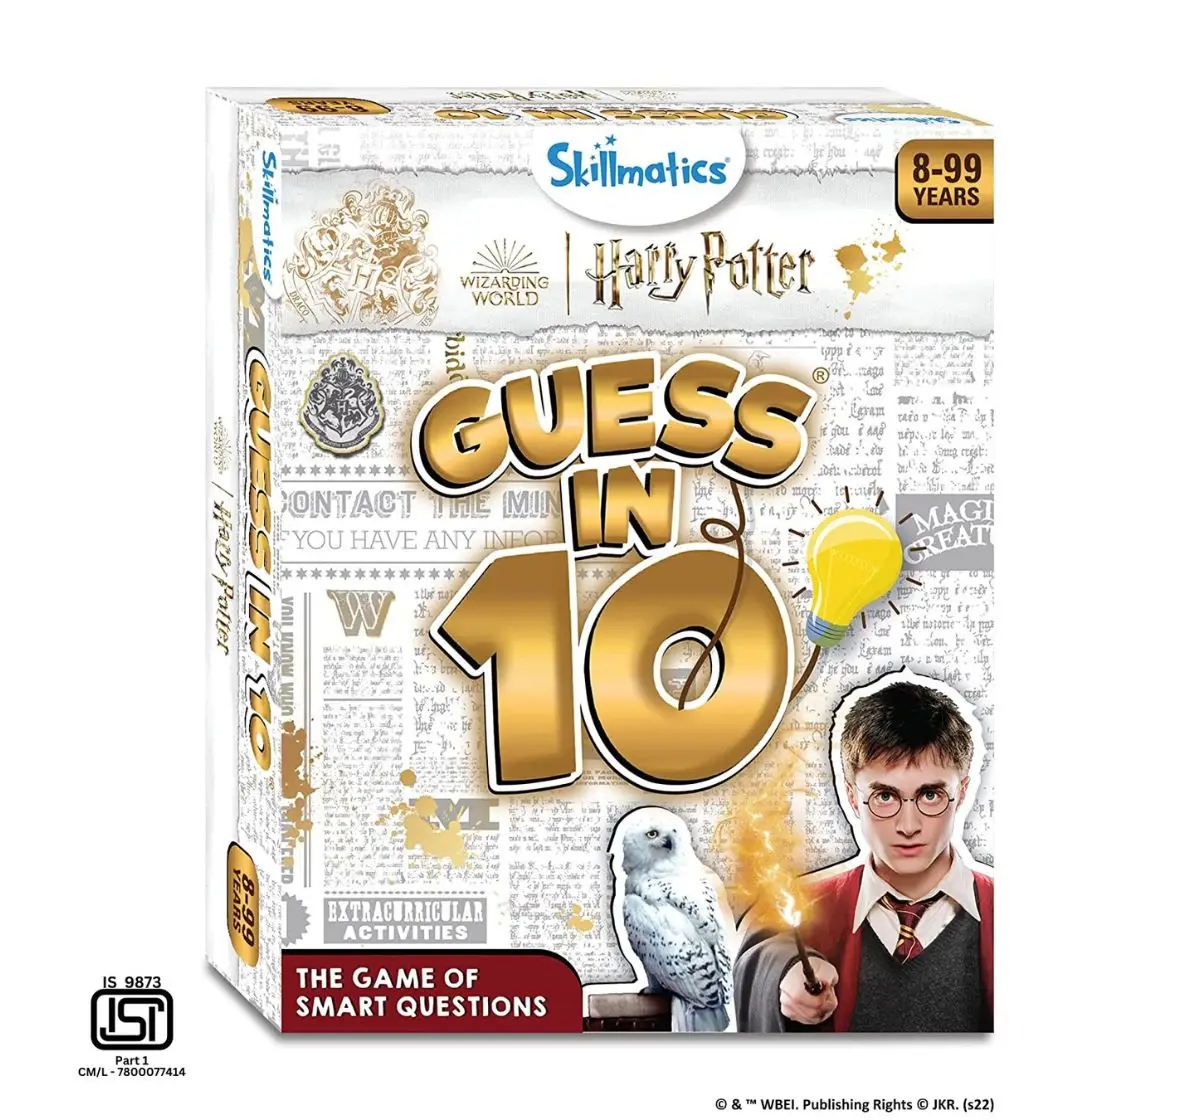 Skillmatics Harry Potter Card Game - Guess in 10, Gifts for 8 Year Olds and Up, Trivia and Strategy Card Game for Kids, Teens & Adults, Kids for 8Y+, Multicolour